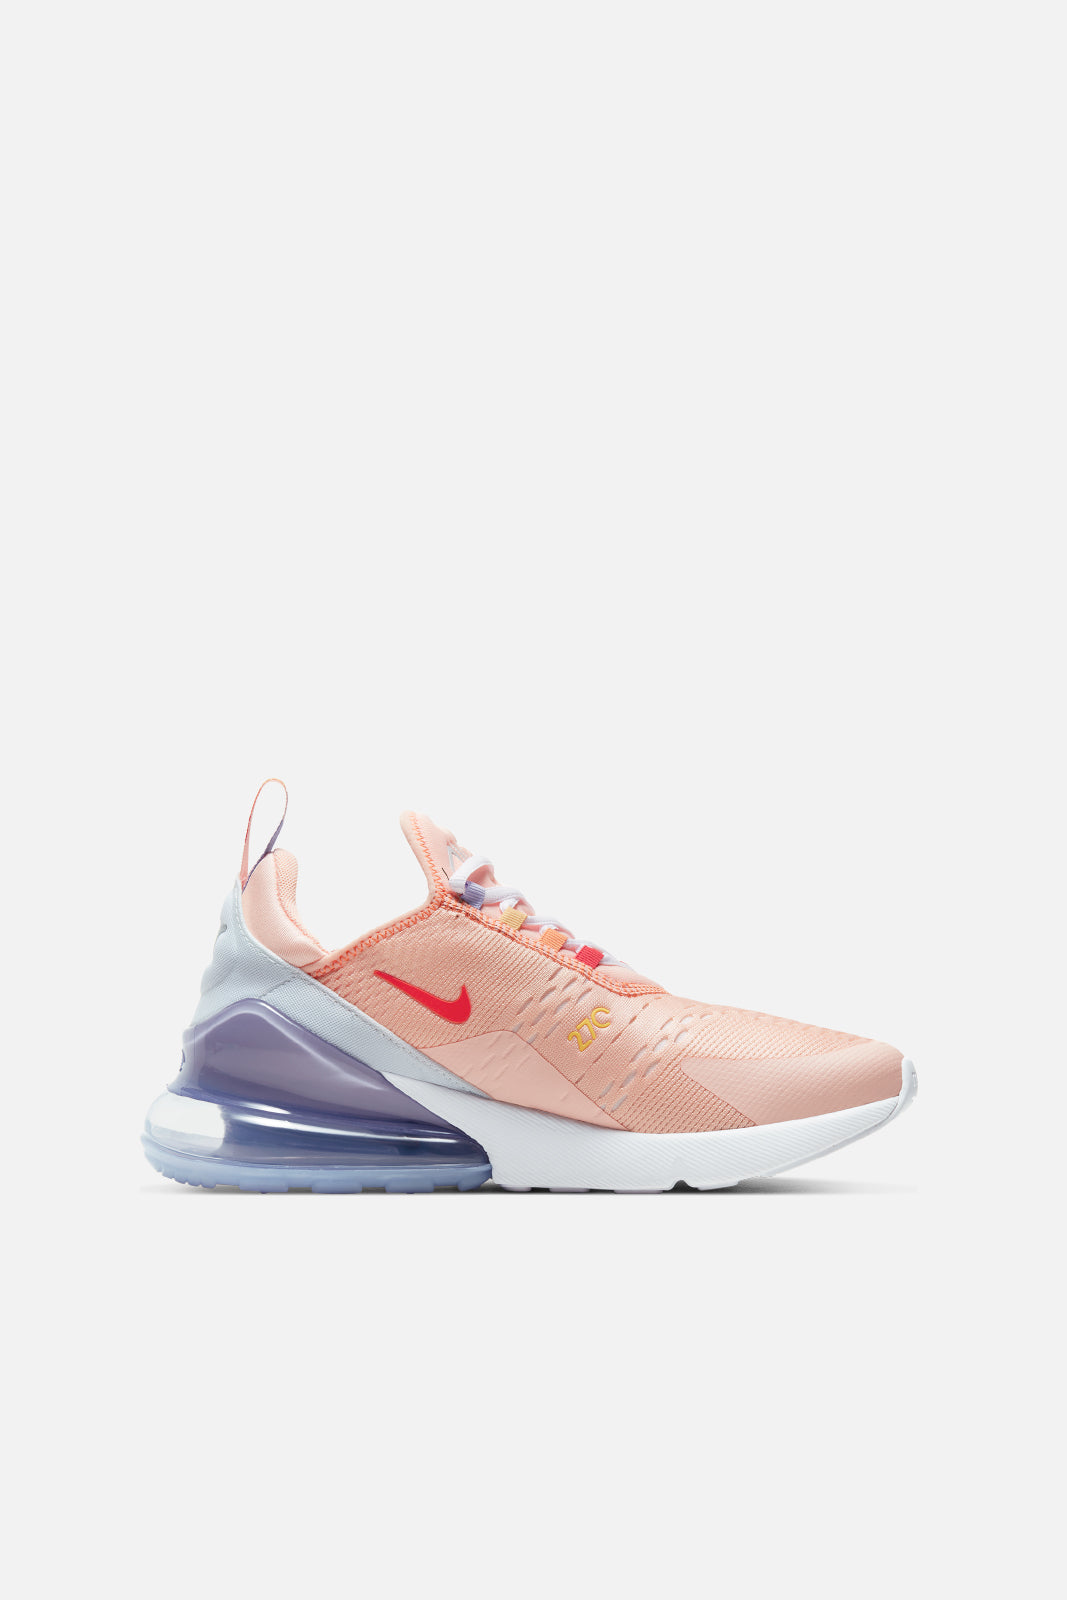 air max 270 just do it cw 